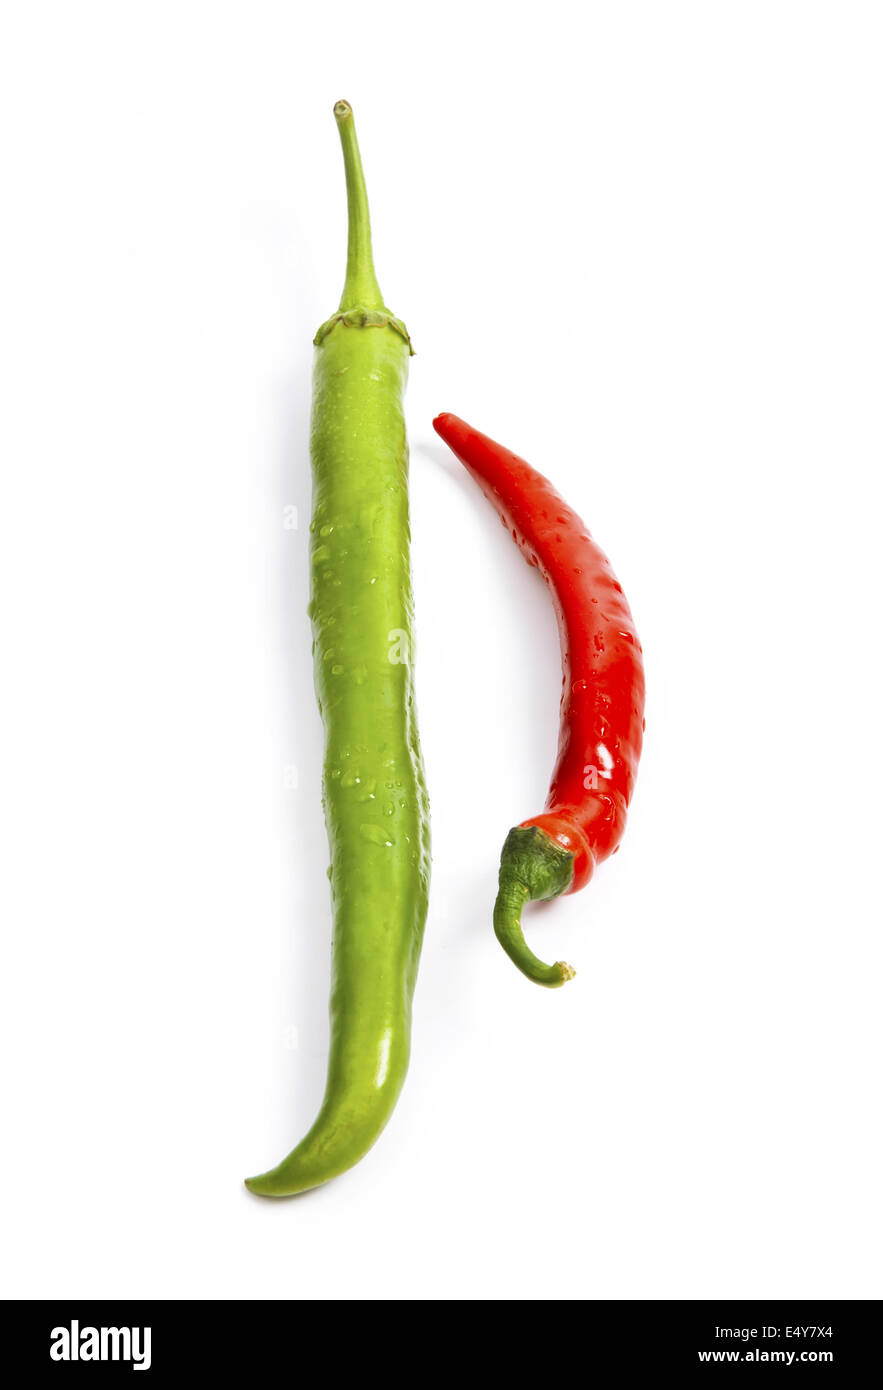 Red and green chili pepper composition Stock Photo